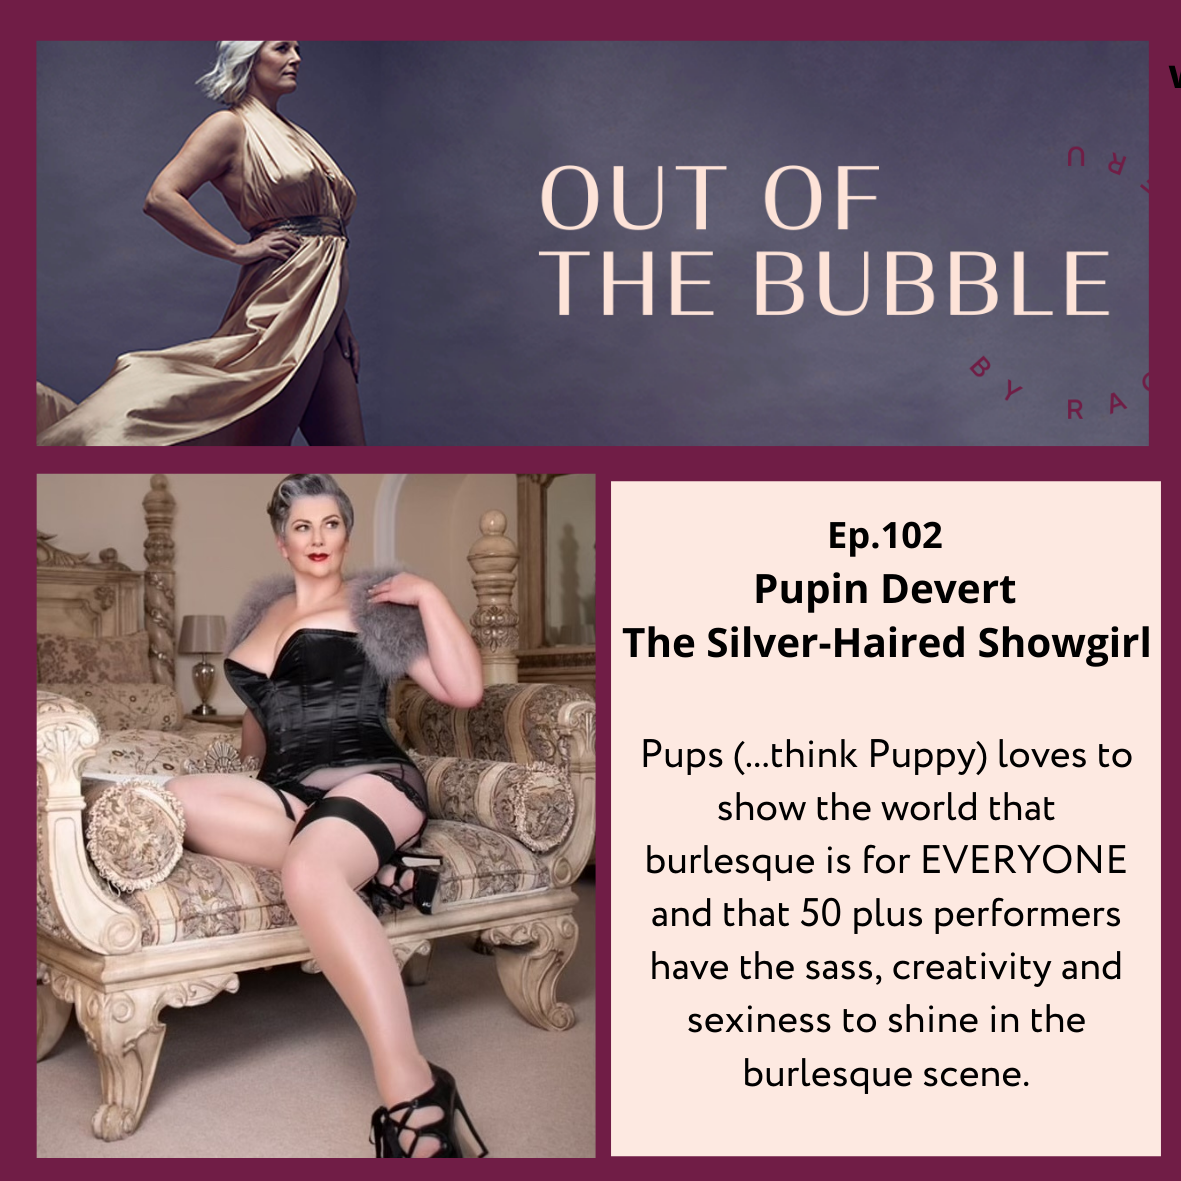 Ep.102 Liberte Free to Be, A Bag Full of Body Confidence with Burlesque Performer Judith Vandepeer aka 